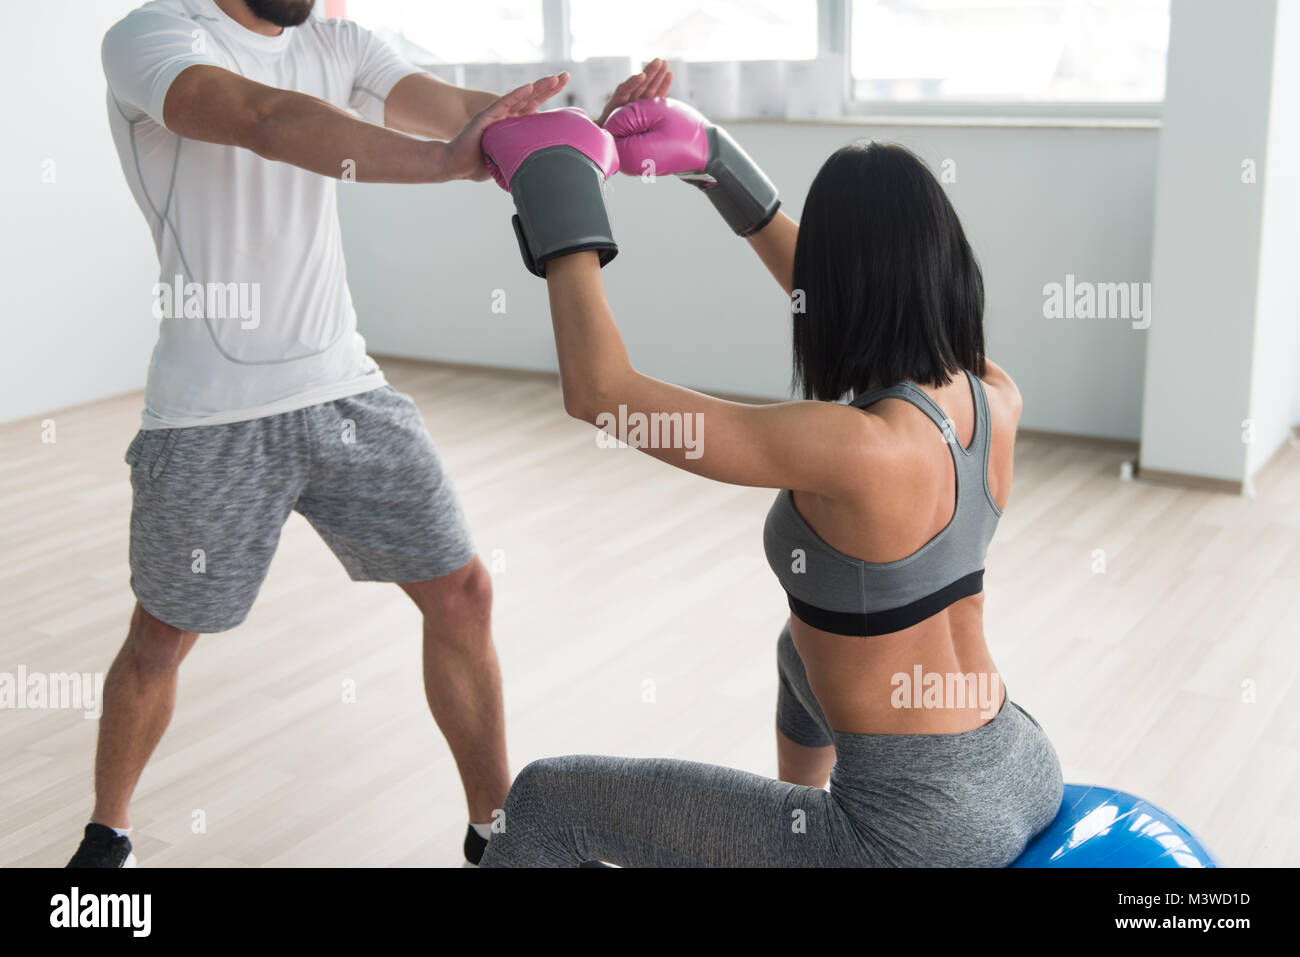 Woman Boxer MMA Fighter Practice Her Skills With Personal Trainer In Gym Stock Photo